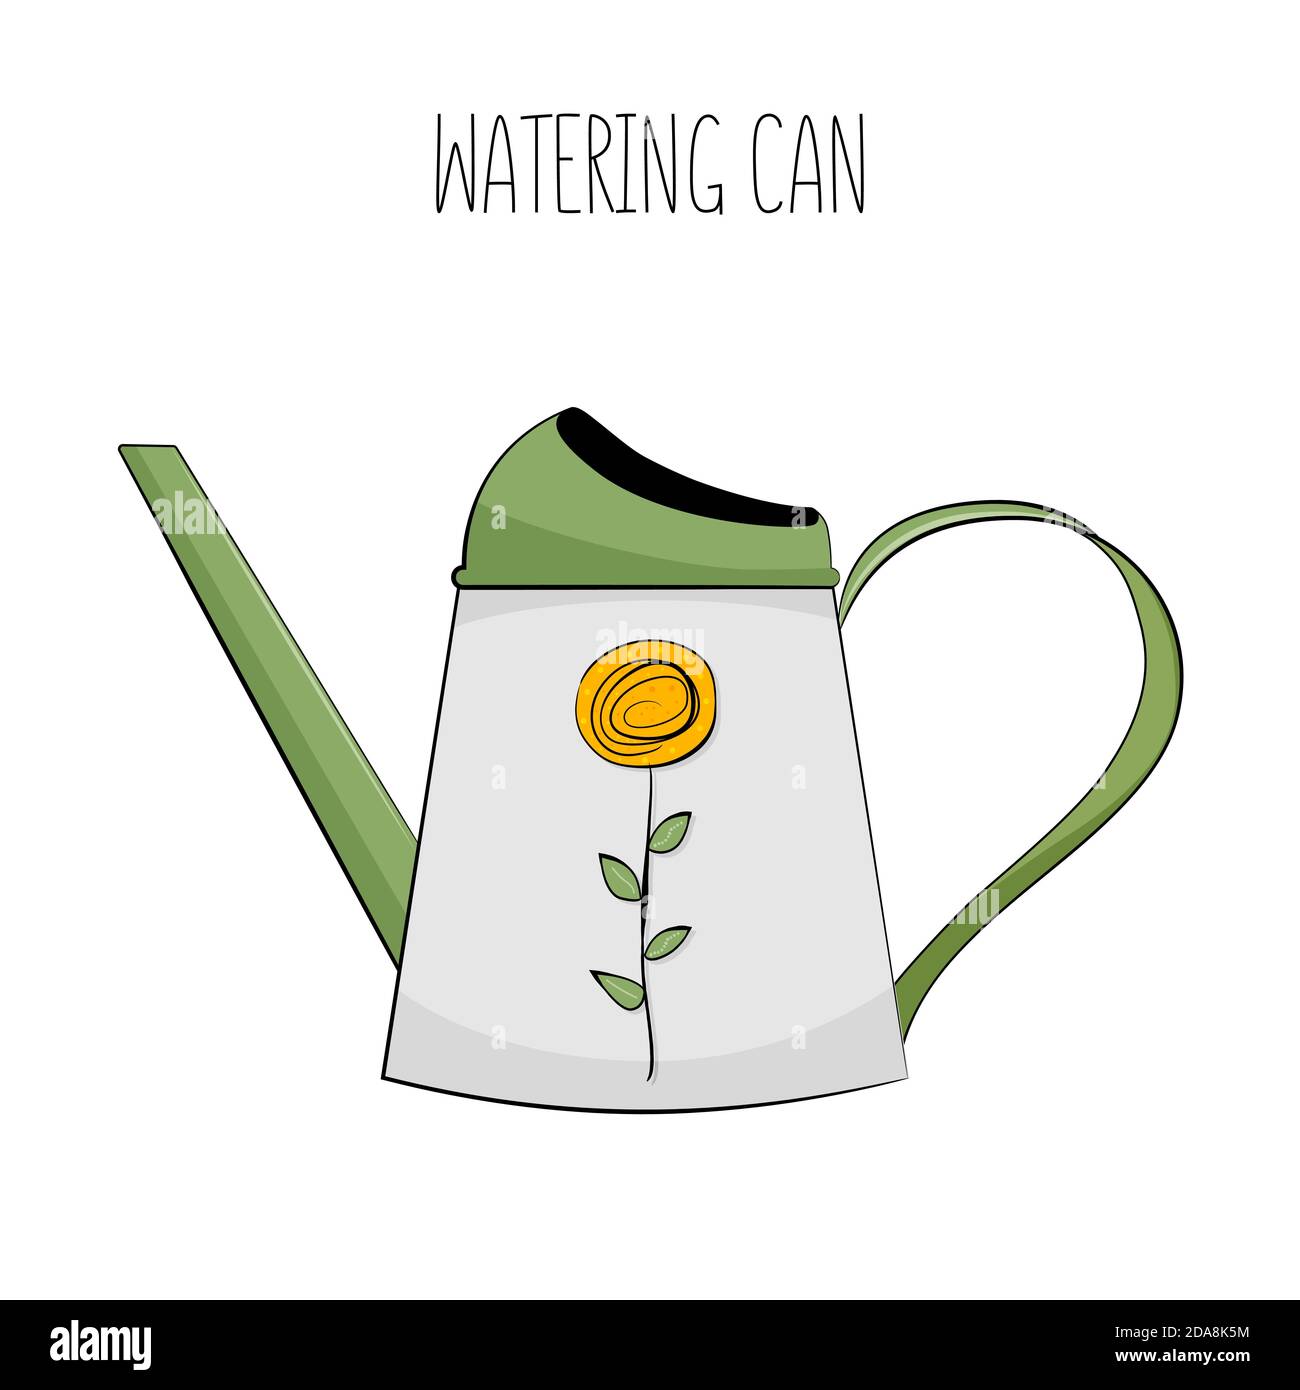 Watering can isolated on white background. Vector illustration. Stock Vector